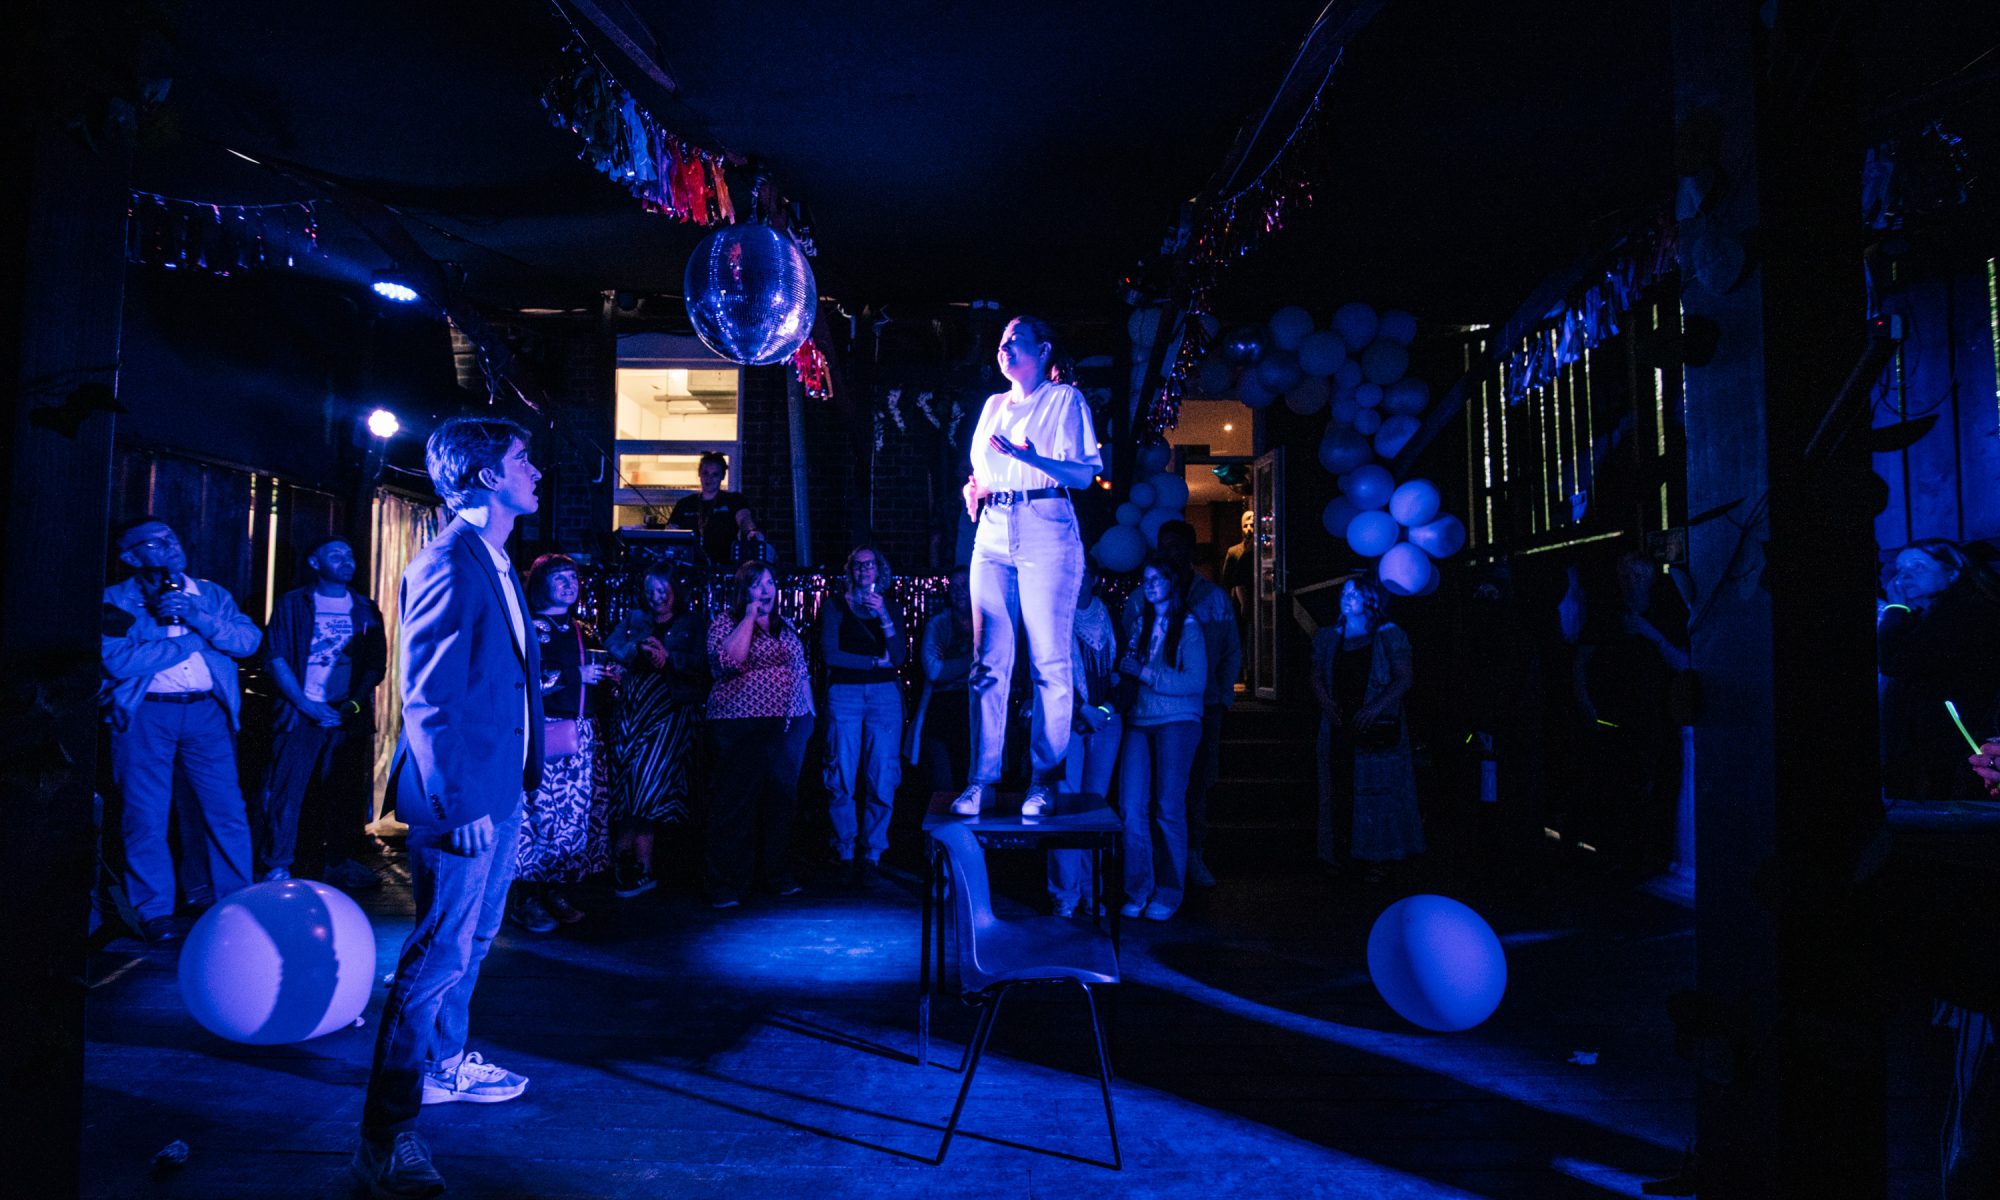 Performer standing on a table surrounded by a crowd